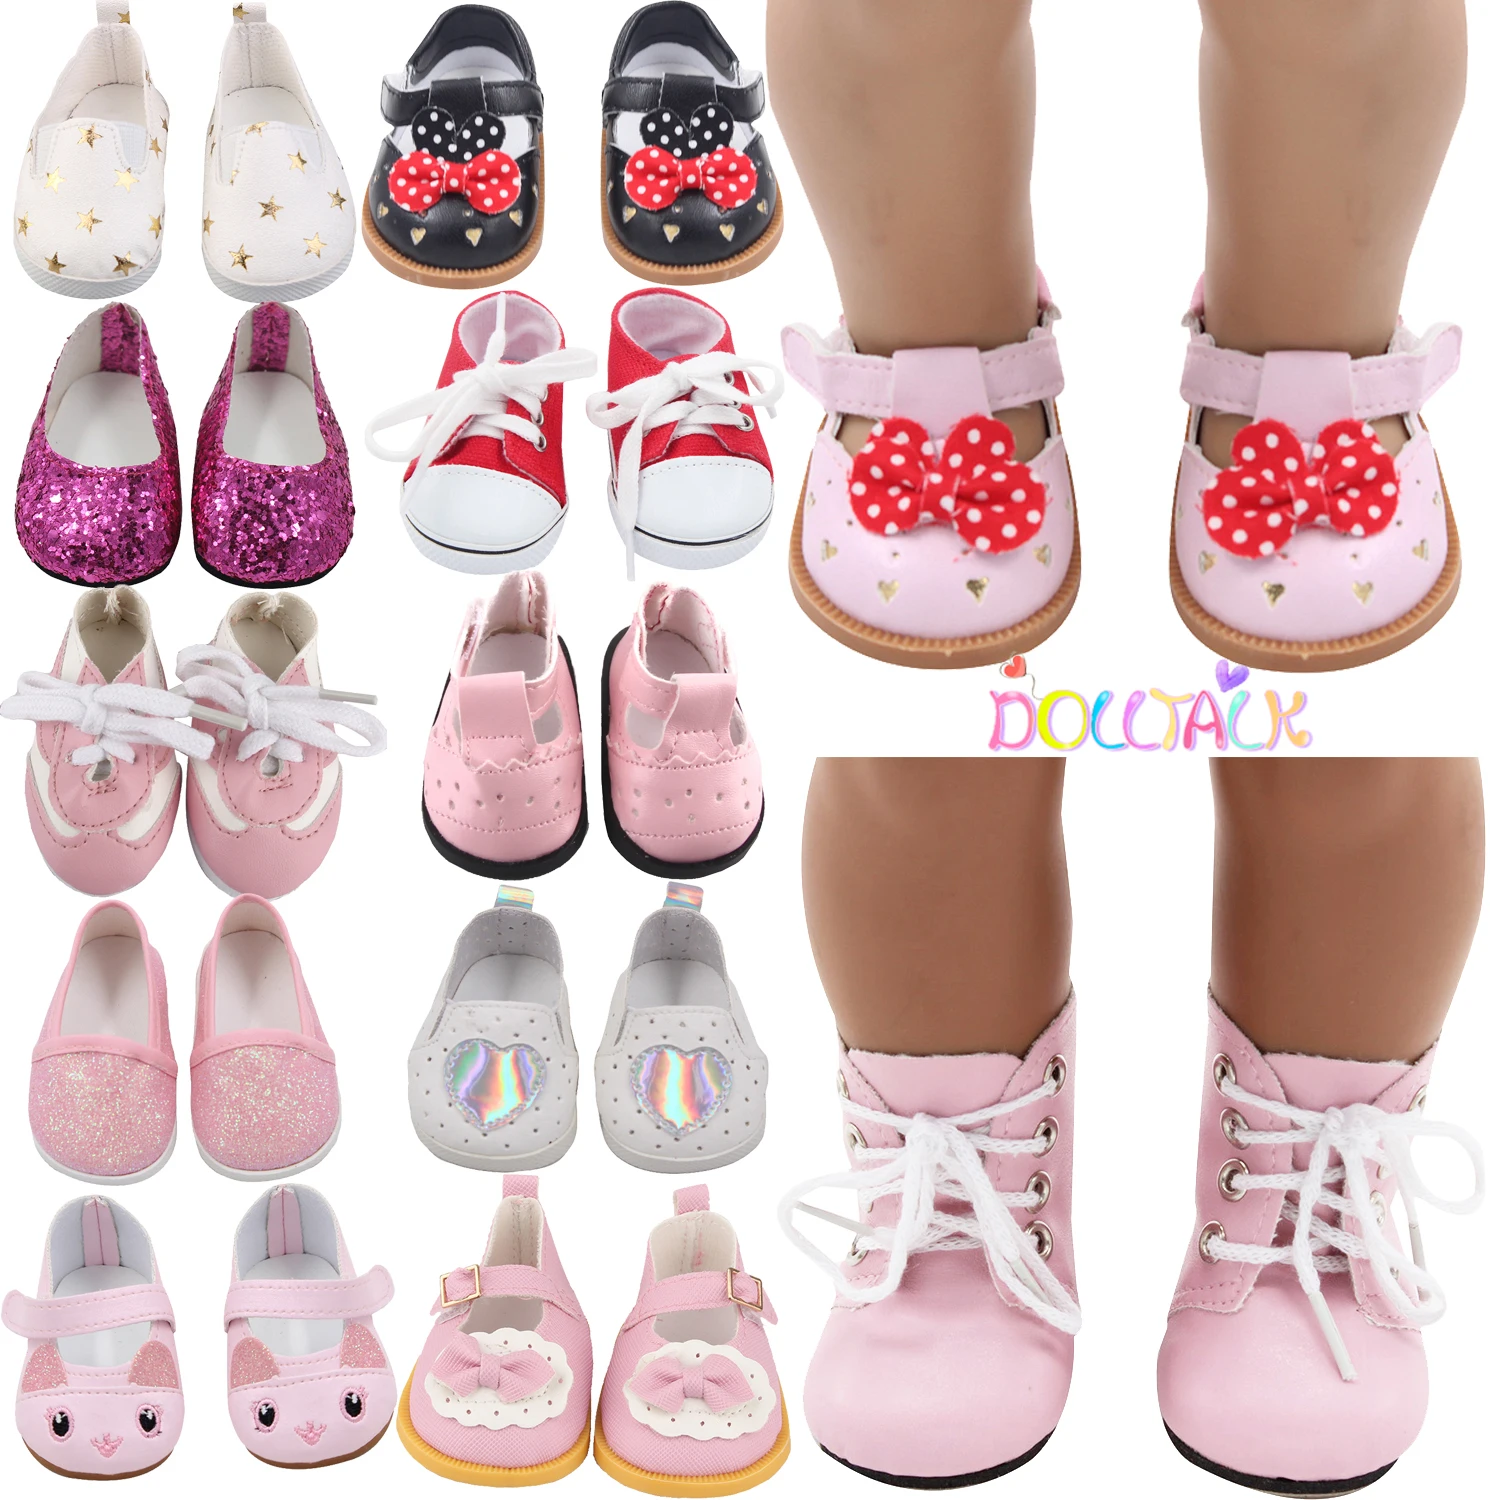 7 Cm Doll Shoes Clothes Handmade Boots For American 18 Inch Girl&43Cm Baby New Born,OG Doll Accessories Shoes Gift Festival Toy